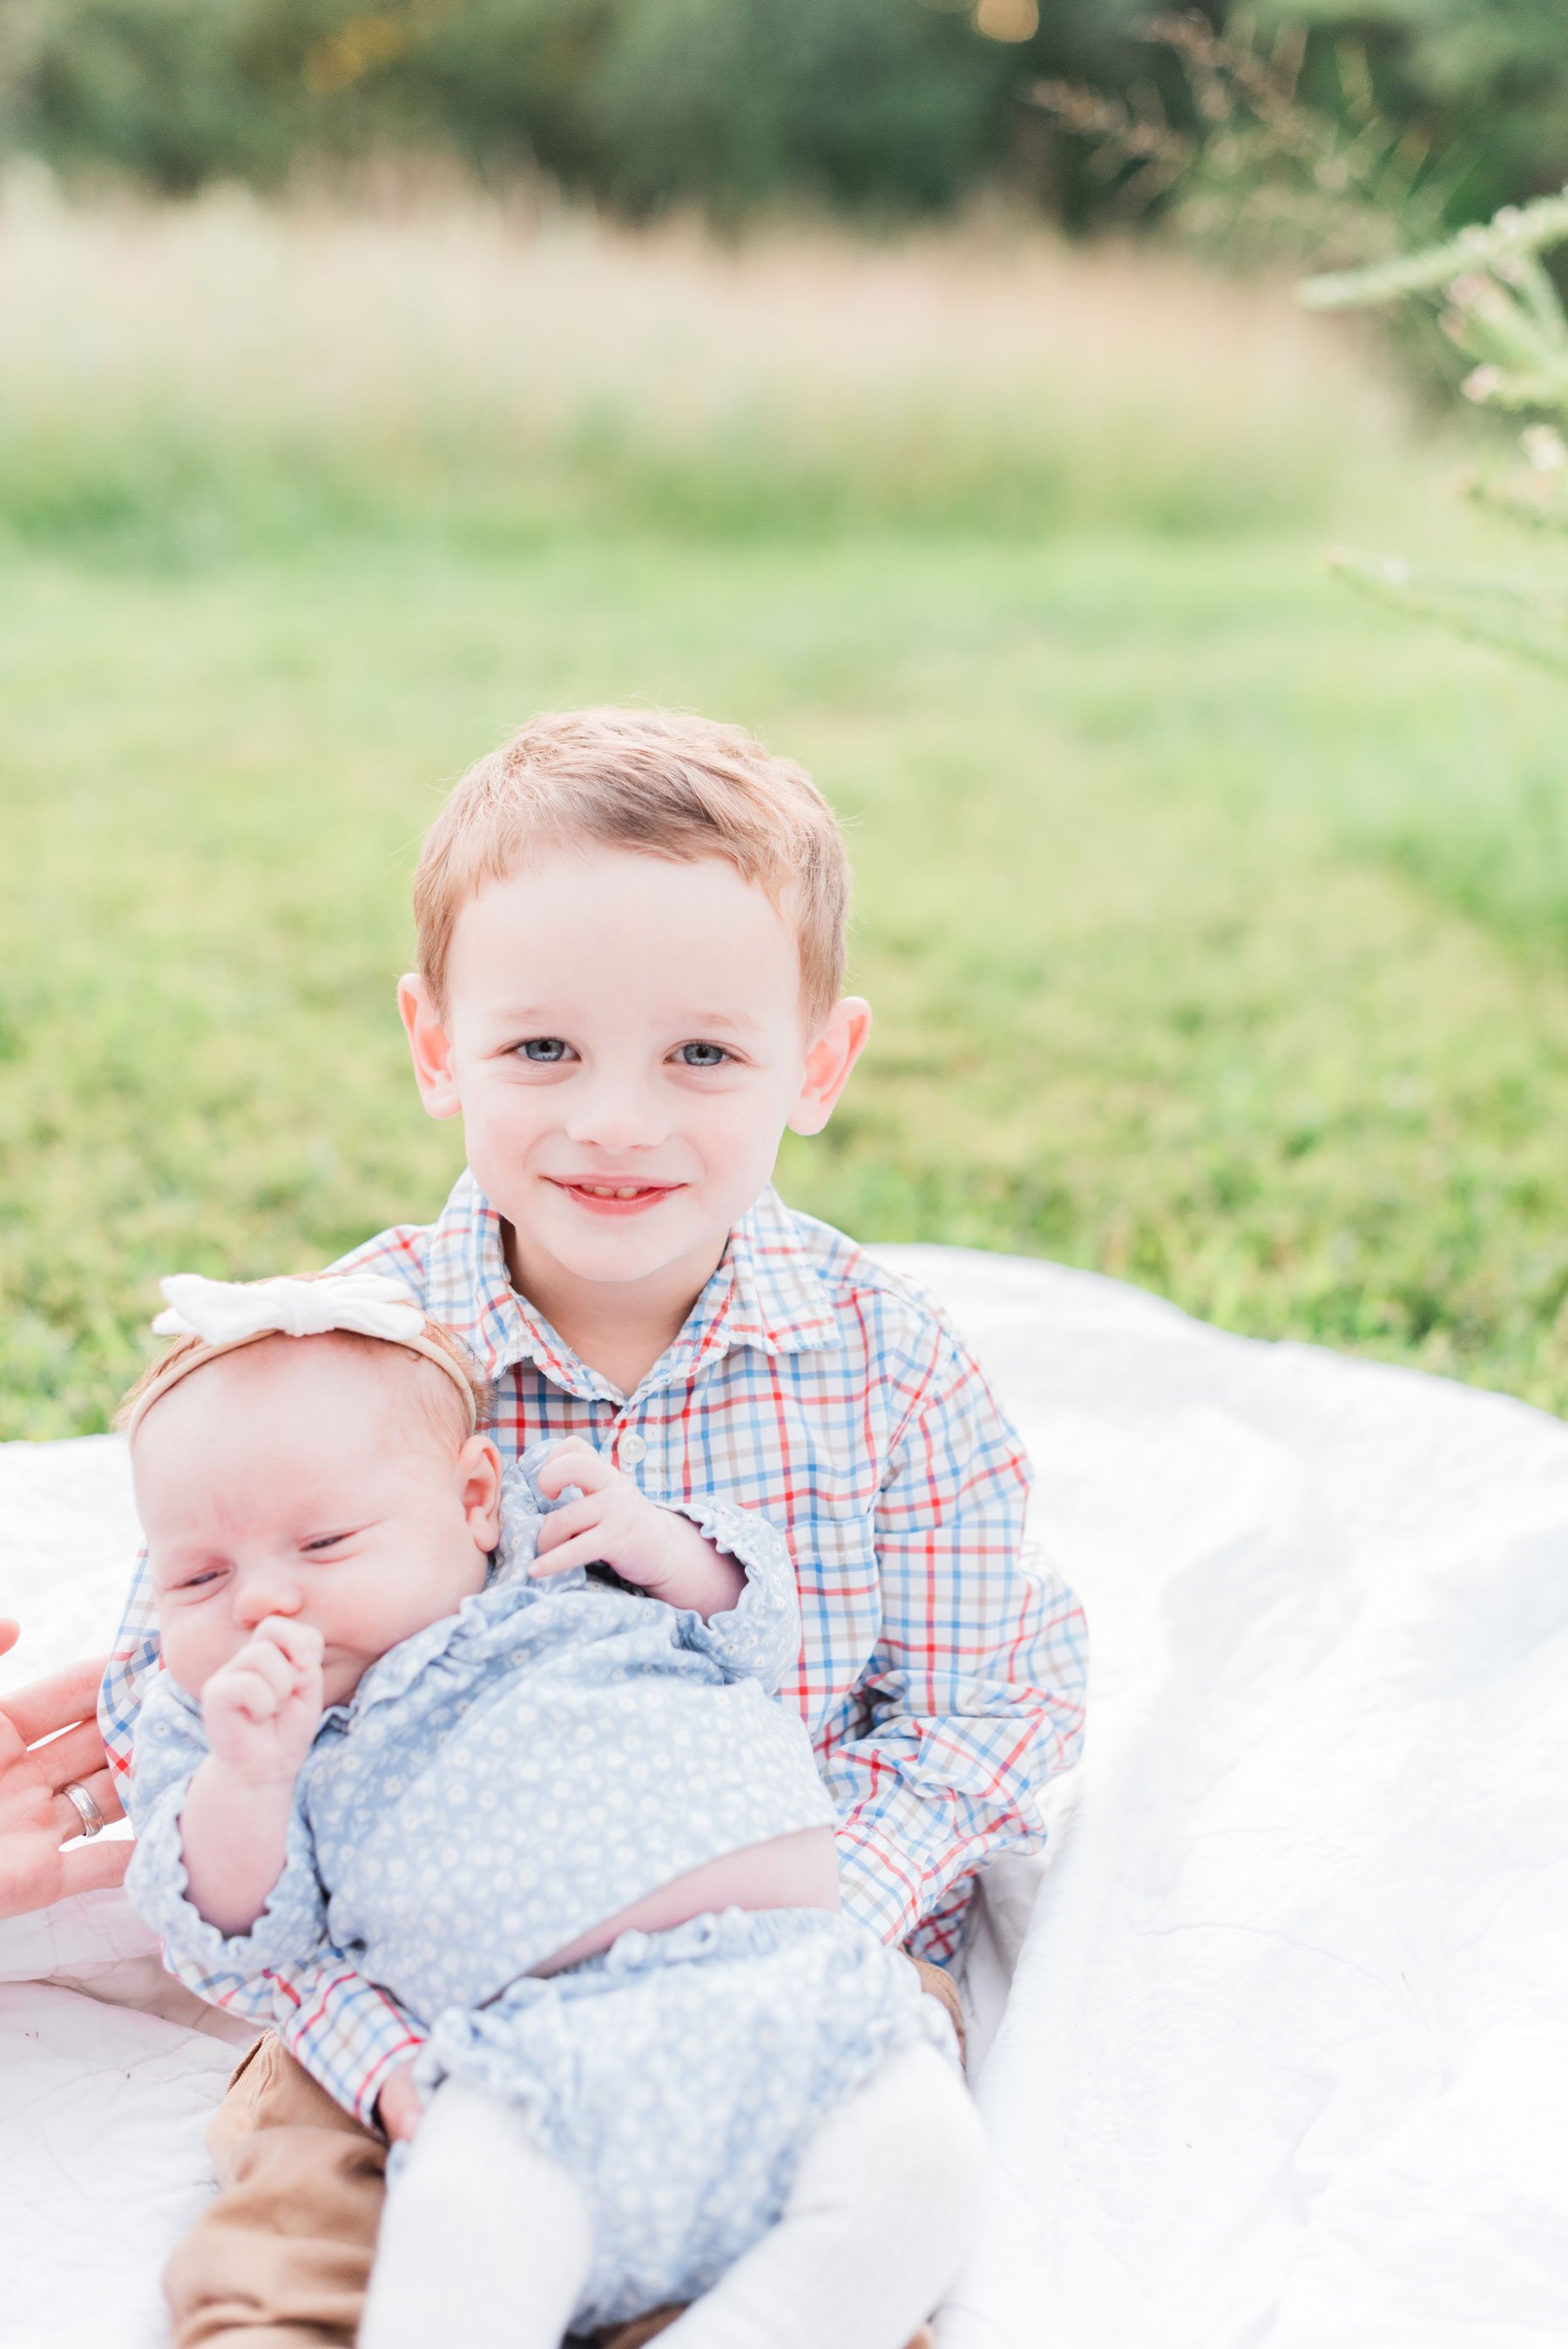    These sweet little siblings smile for a portrait in the green maryland grass. #marylandfamilyphotographer #findingafamilyphotographer #familyphotooutfits #semiformalphotooutfits #outdoorfamilysession #photoswithkids #georgiafamilyphotos #siblingph